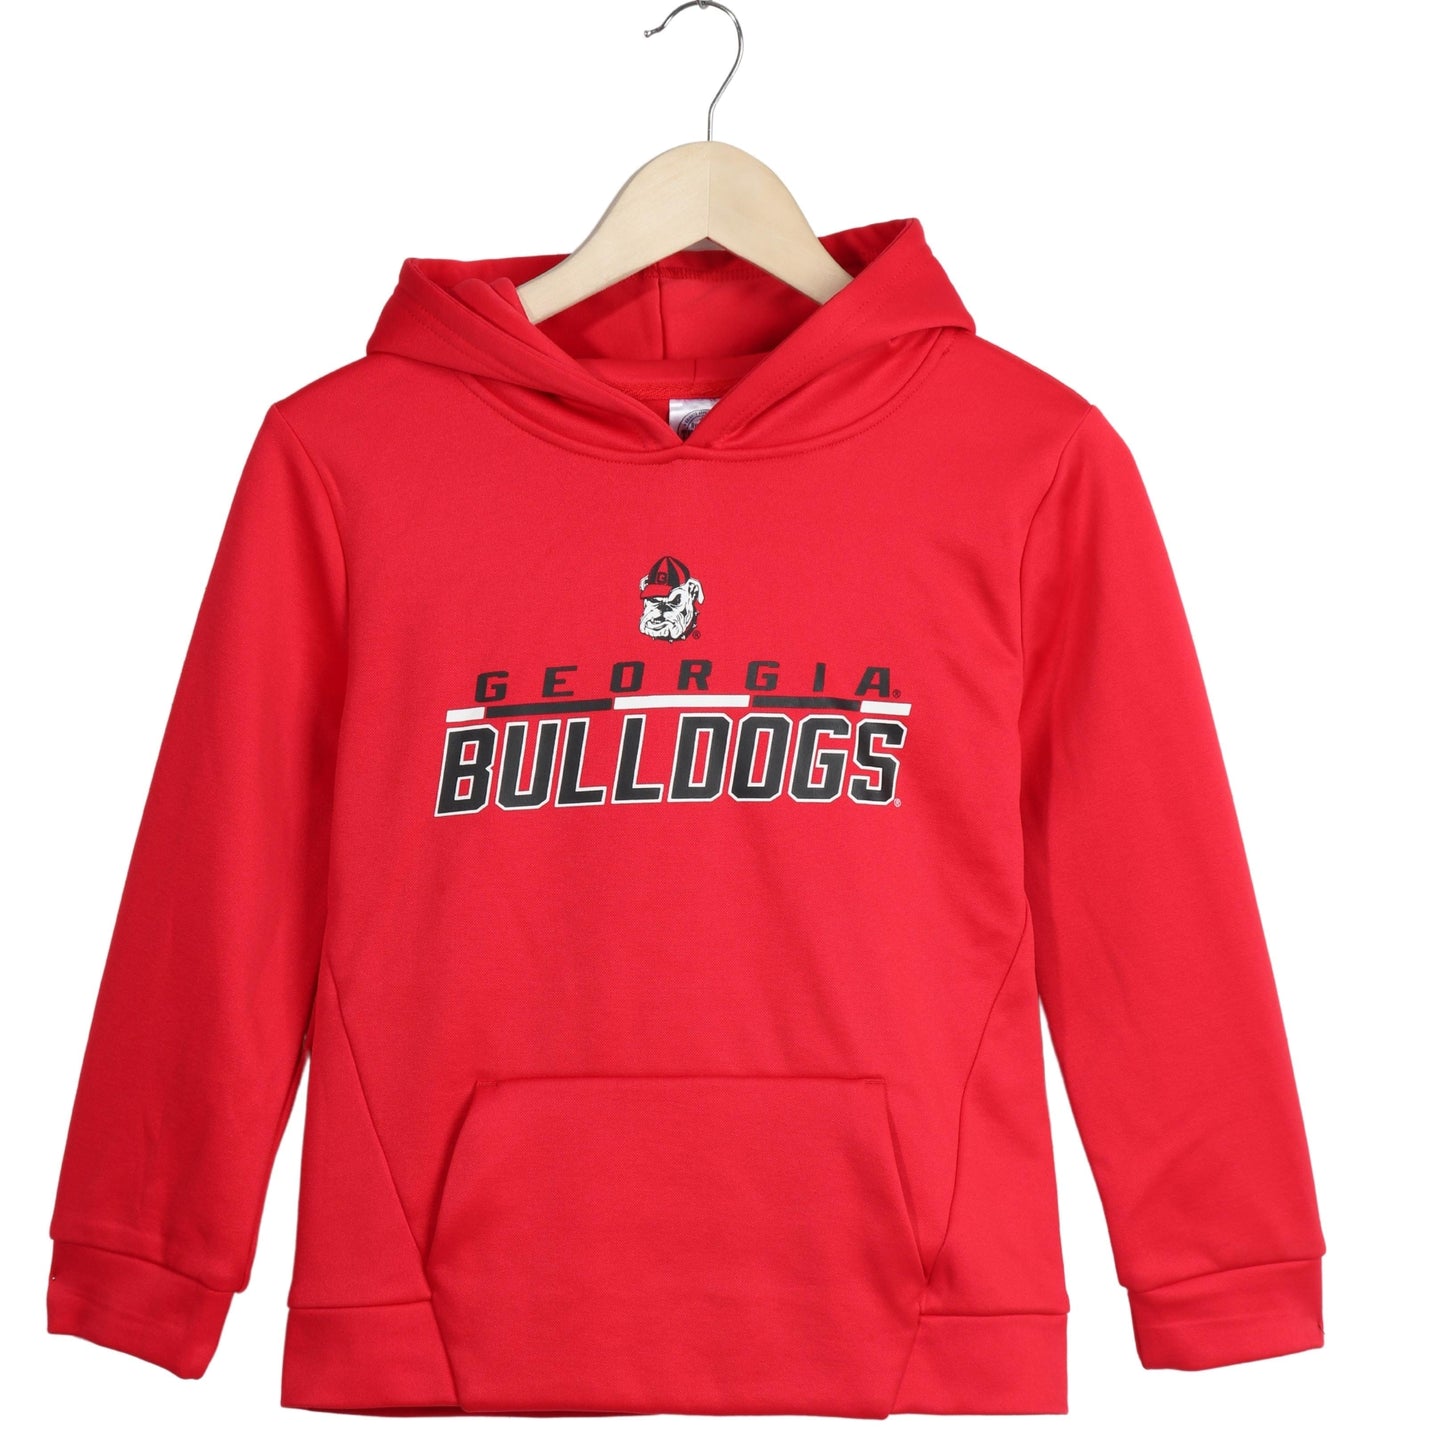 RIVALRY THREADS Boys Tops M / Red RIVALY THREADS - Printed Hoodies